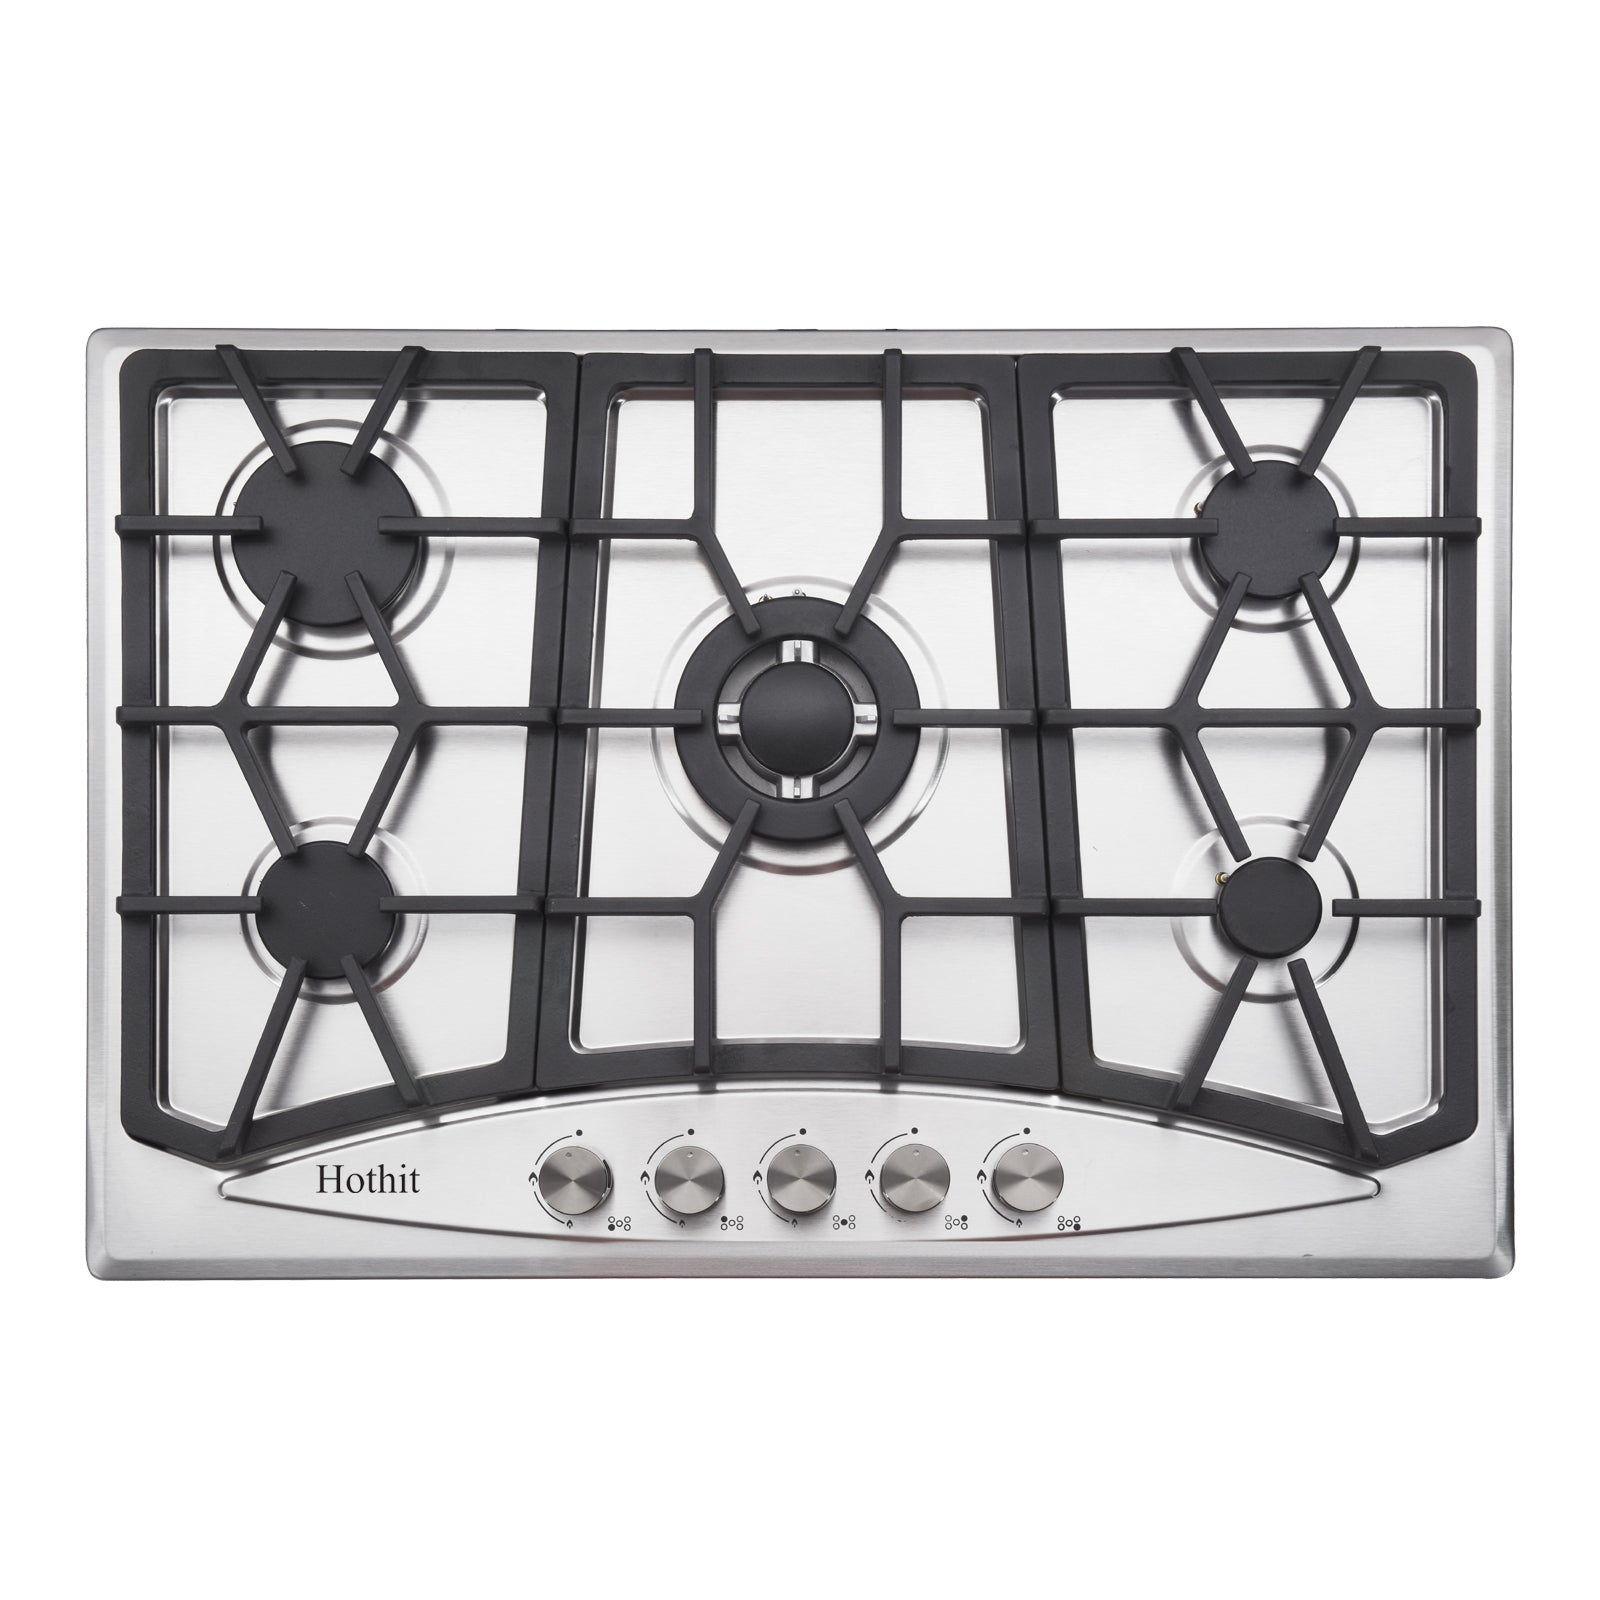 Aht30In20S Sd Hothit Propane Gas Cooktop 30"